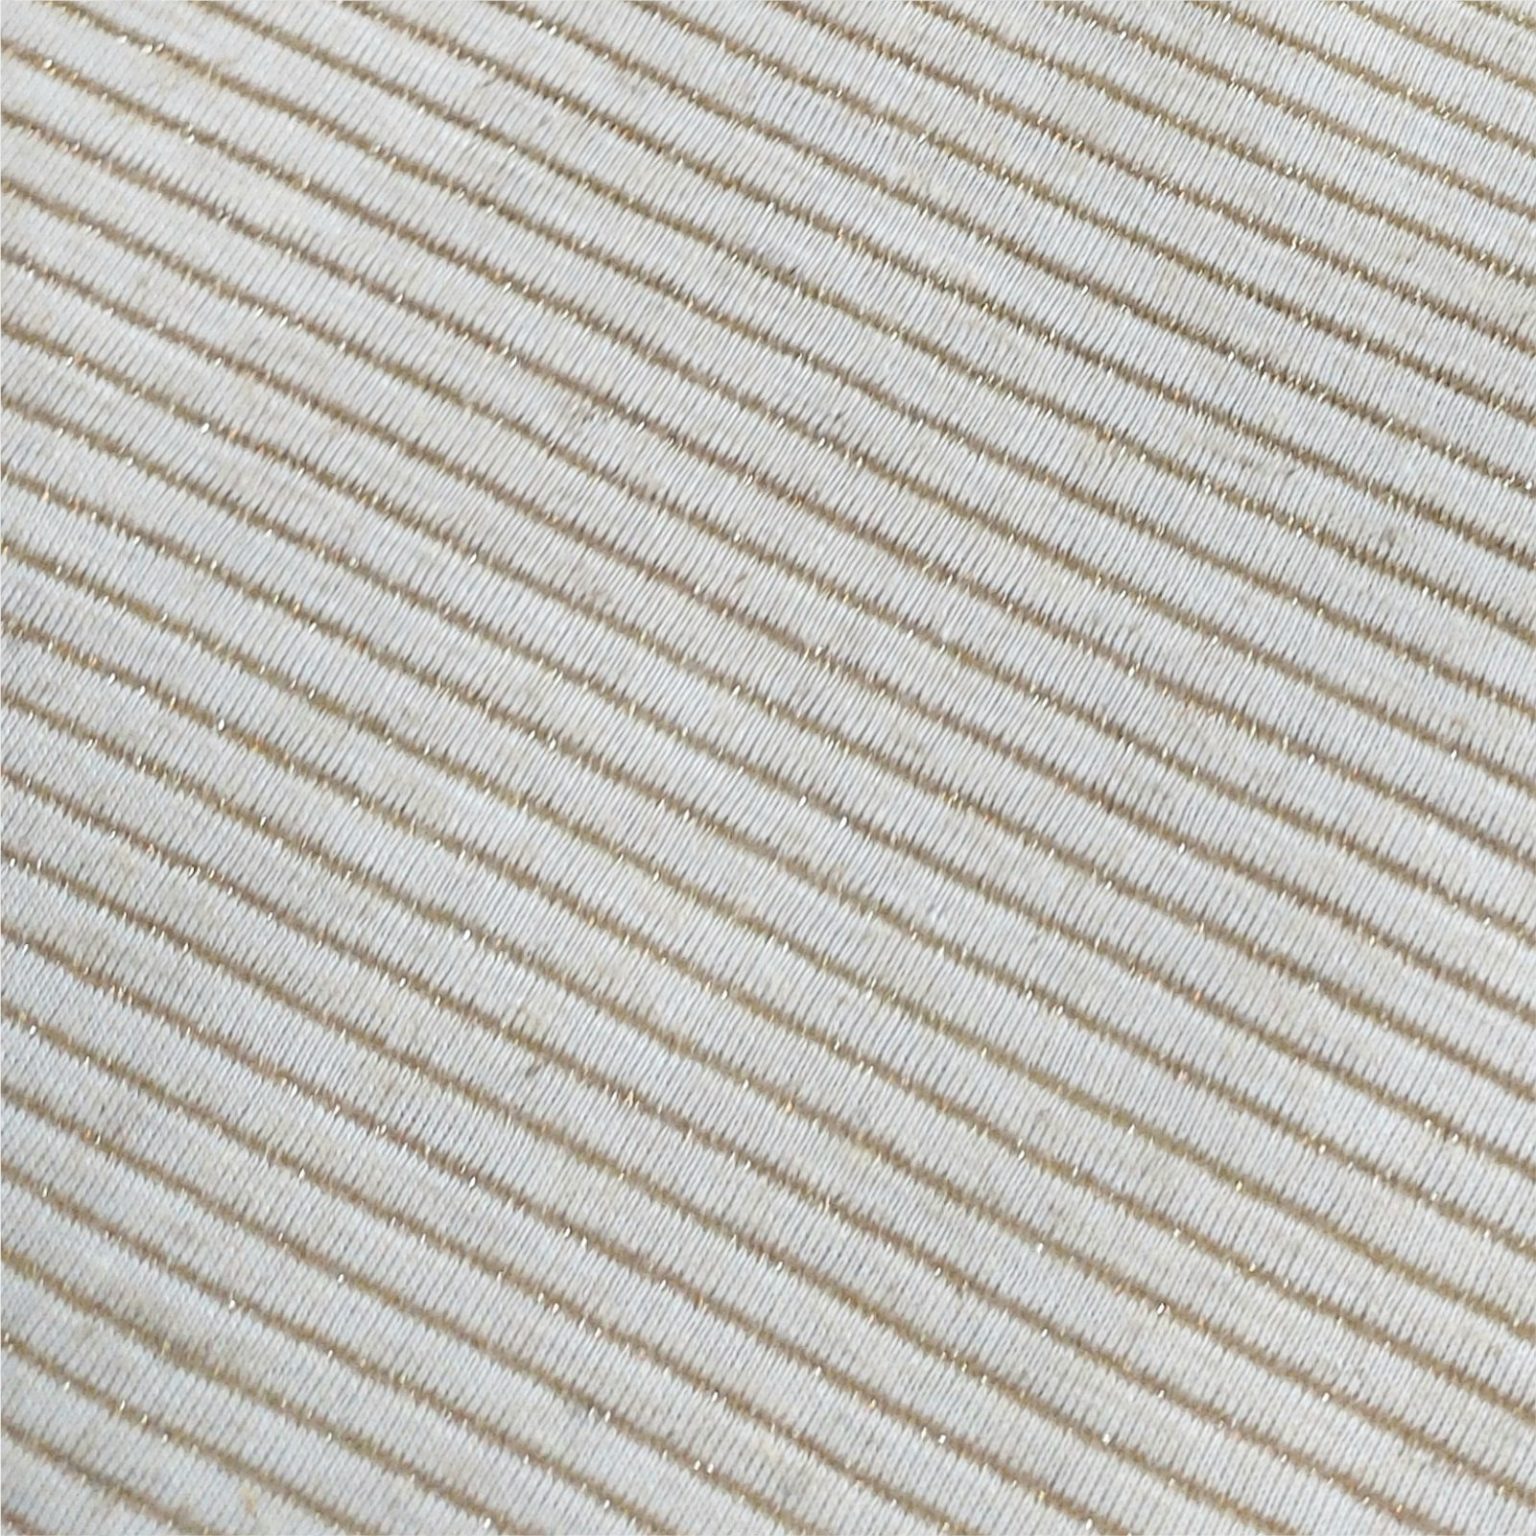 Linen Lurex Stripe Jersey fabric at More Sewing